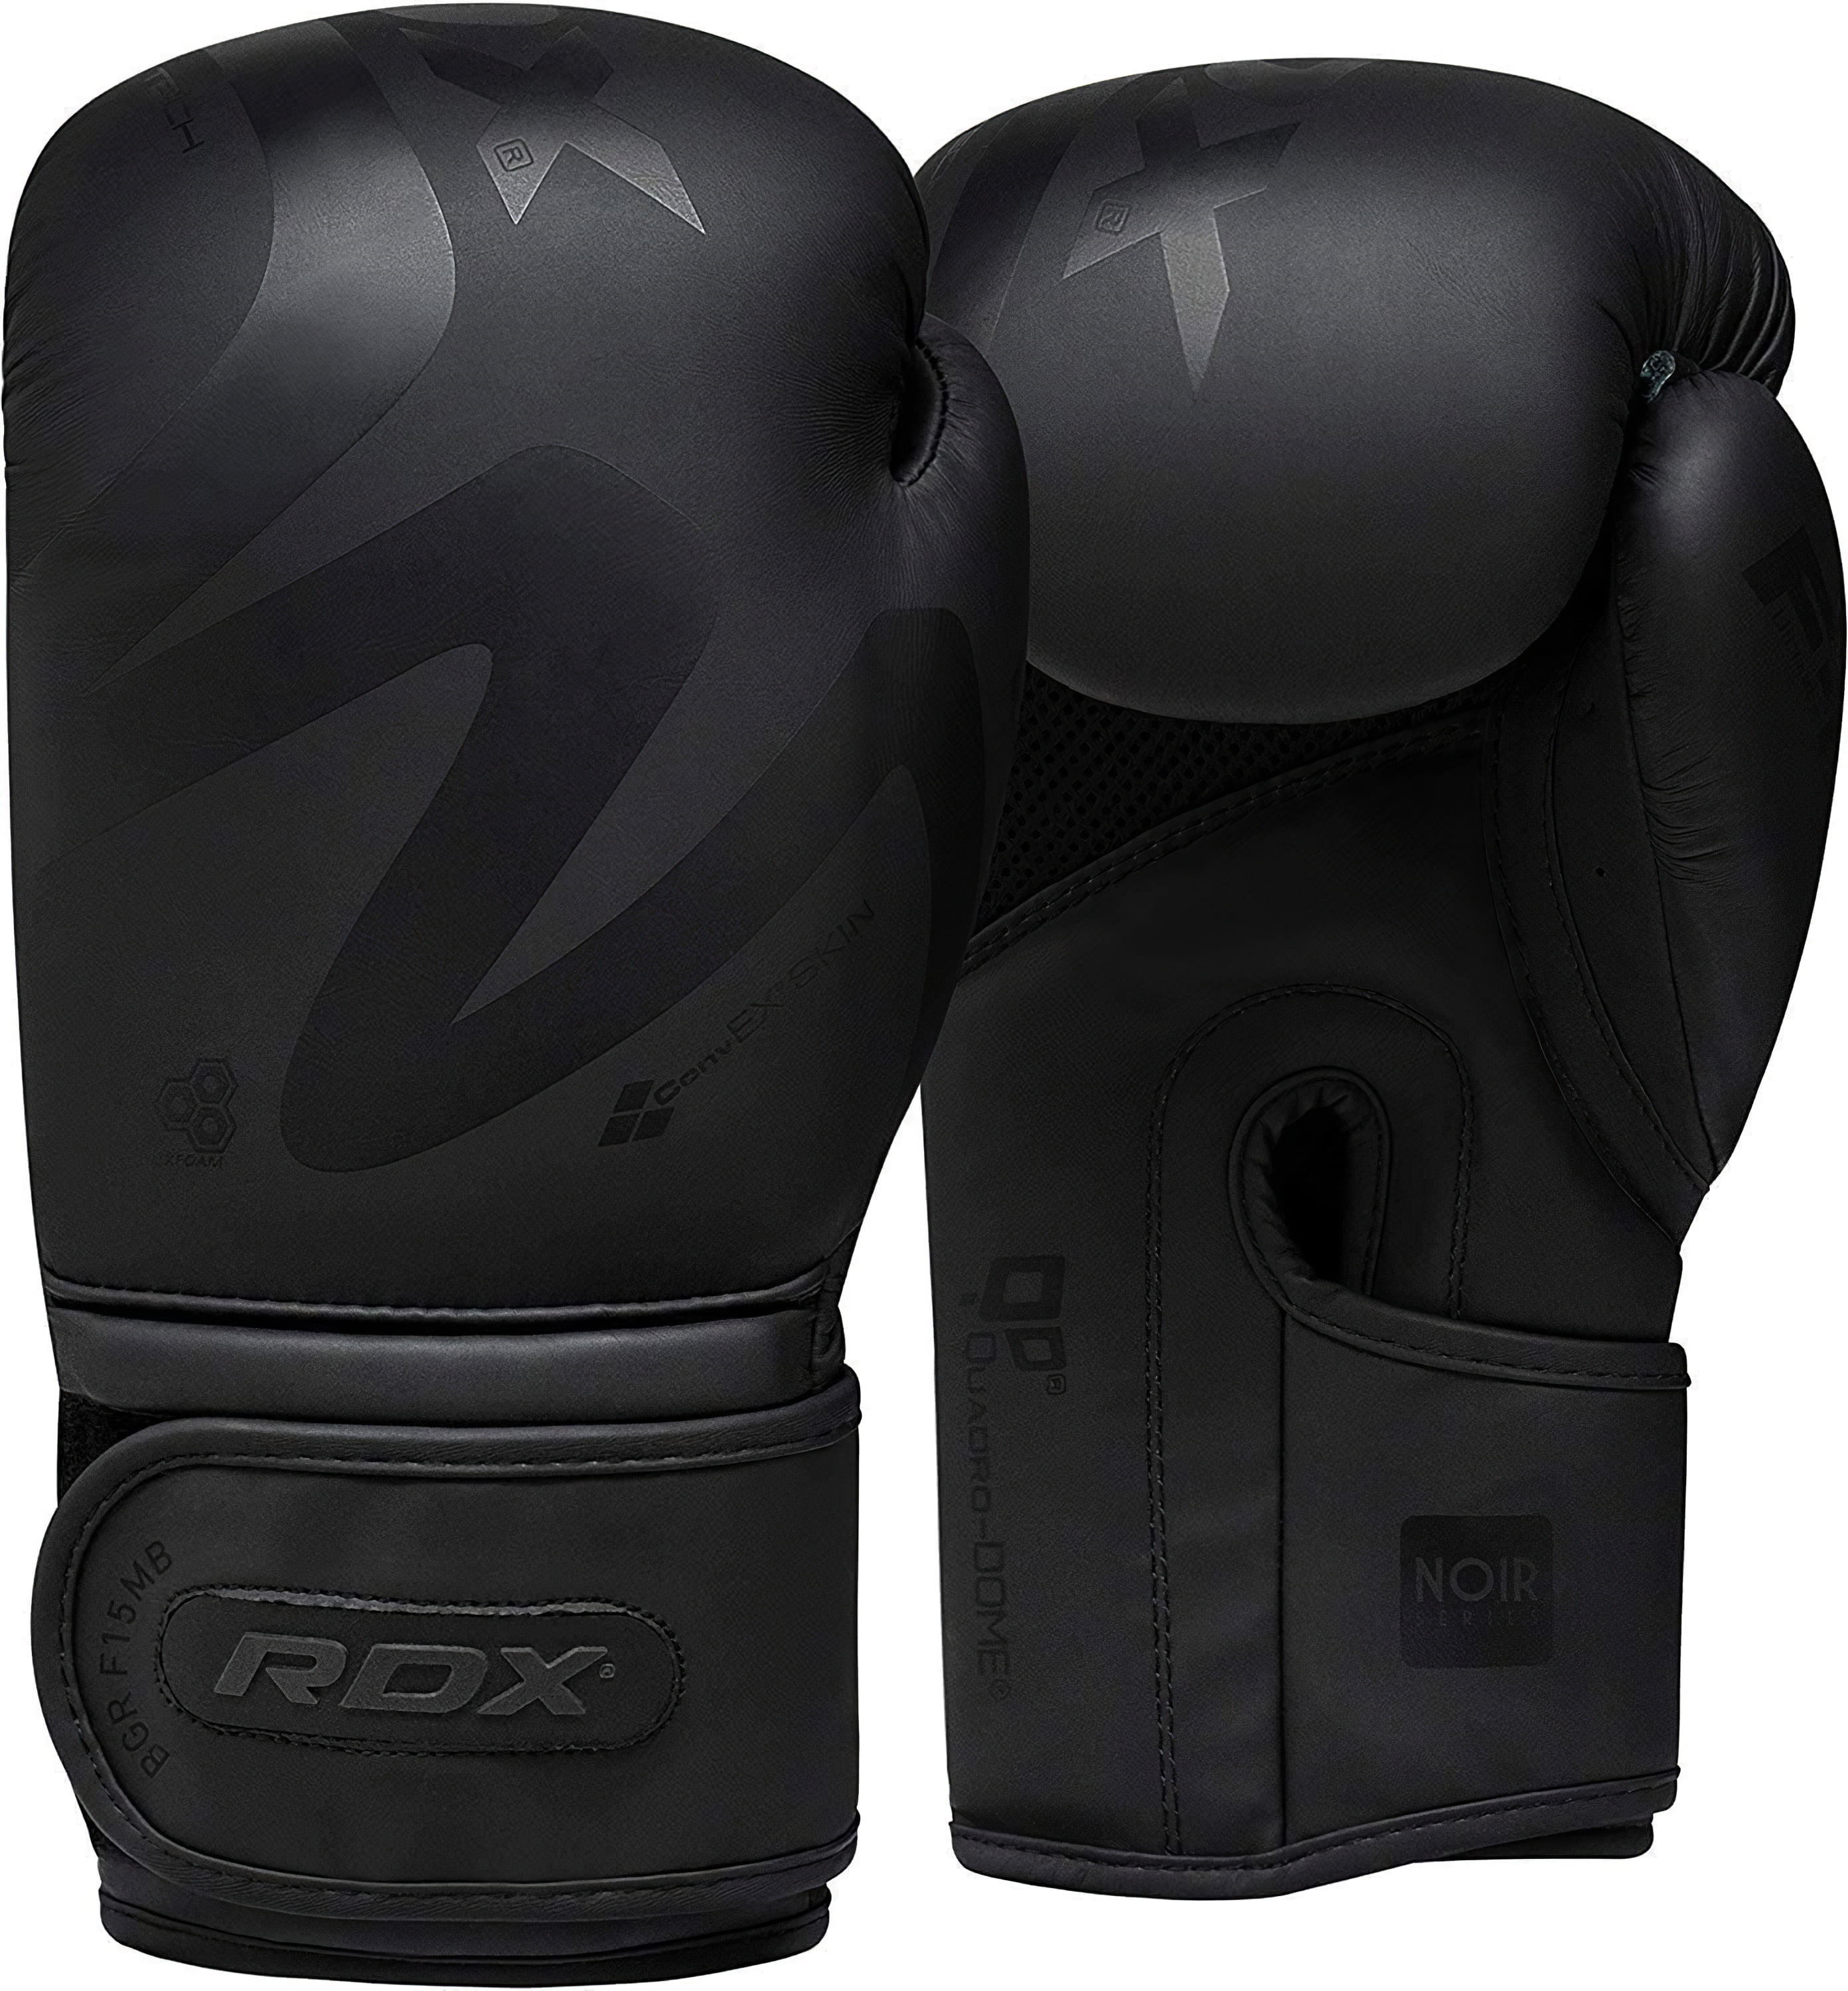 Boxing Gloves Sparring Training Kick Boxing Rex Leather Mitts Gloves 